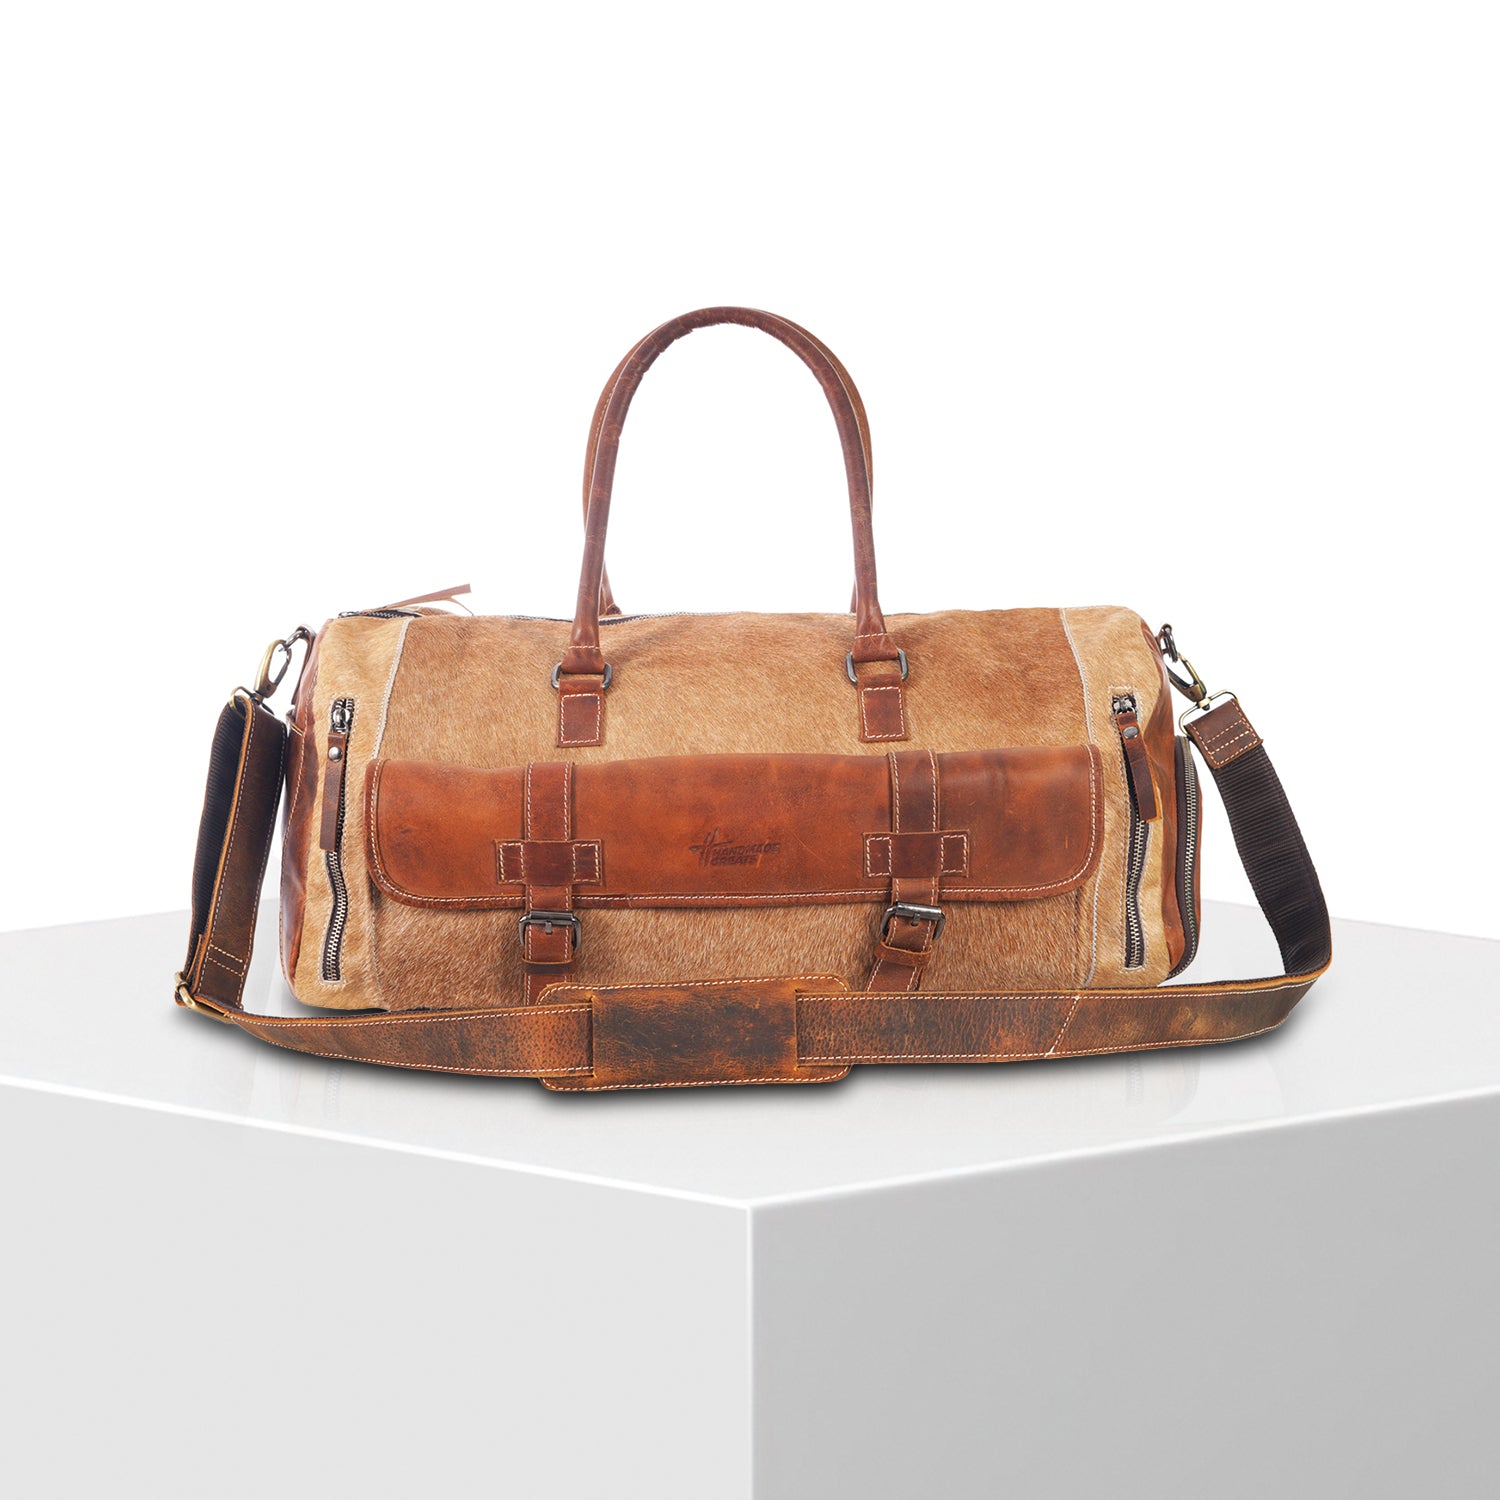 ForestBeast- Hairon Leather Duffle Bag